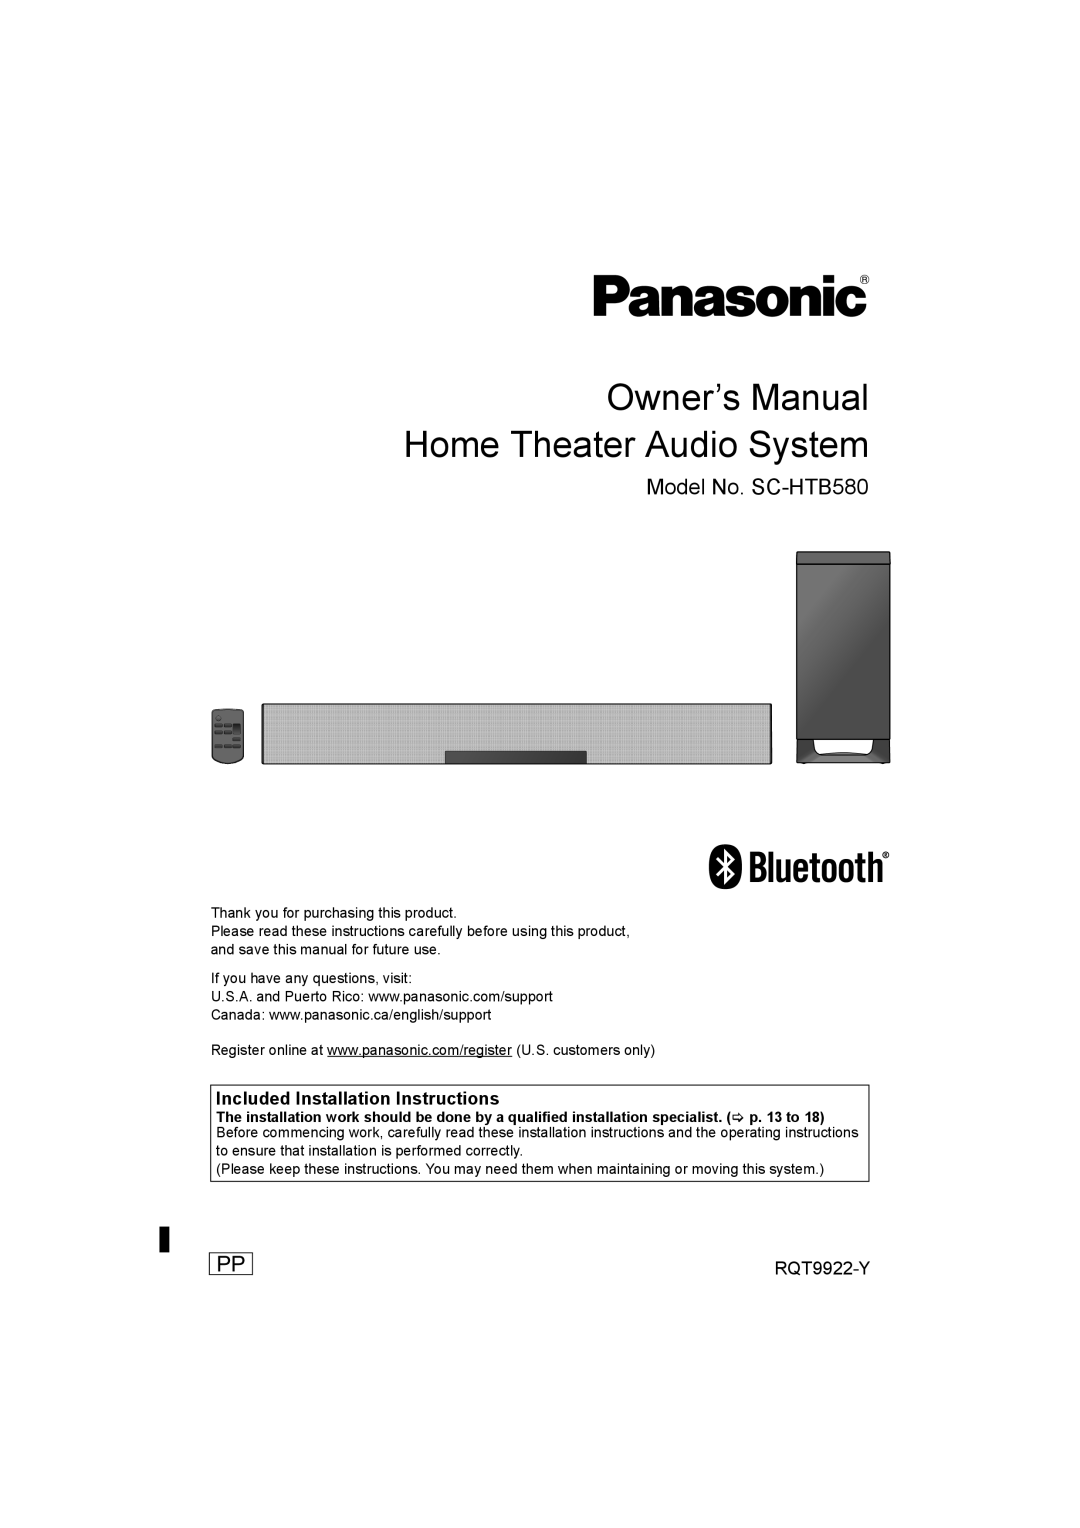 Panasonic owner manual Model No. SC-HTB580, Included Installation Instructions, RQT9922-Y 